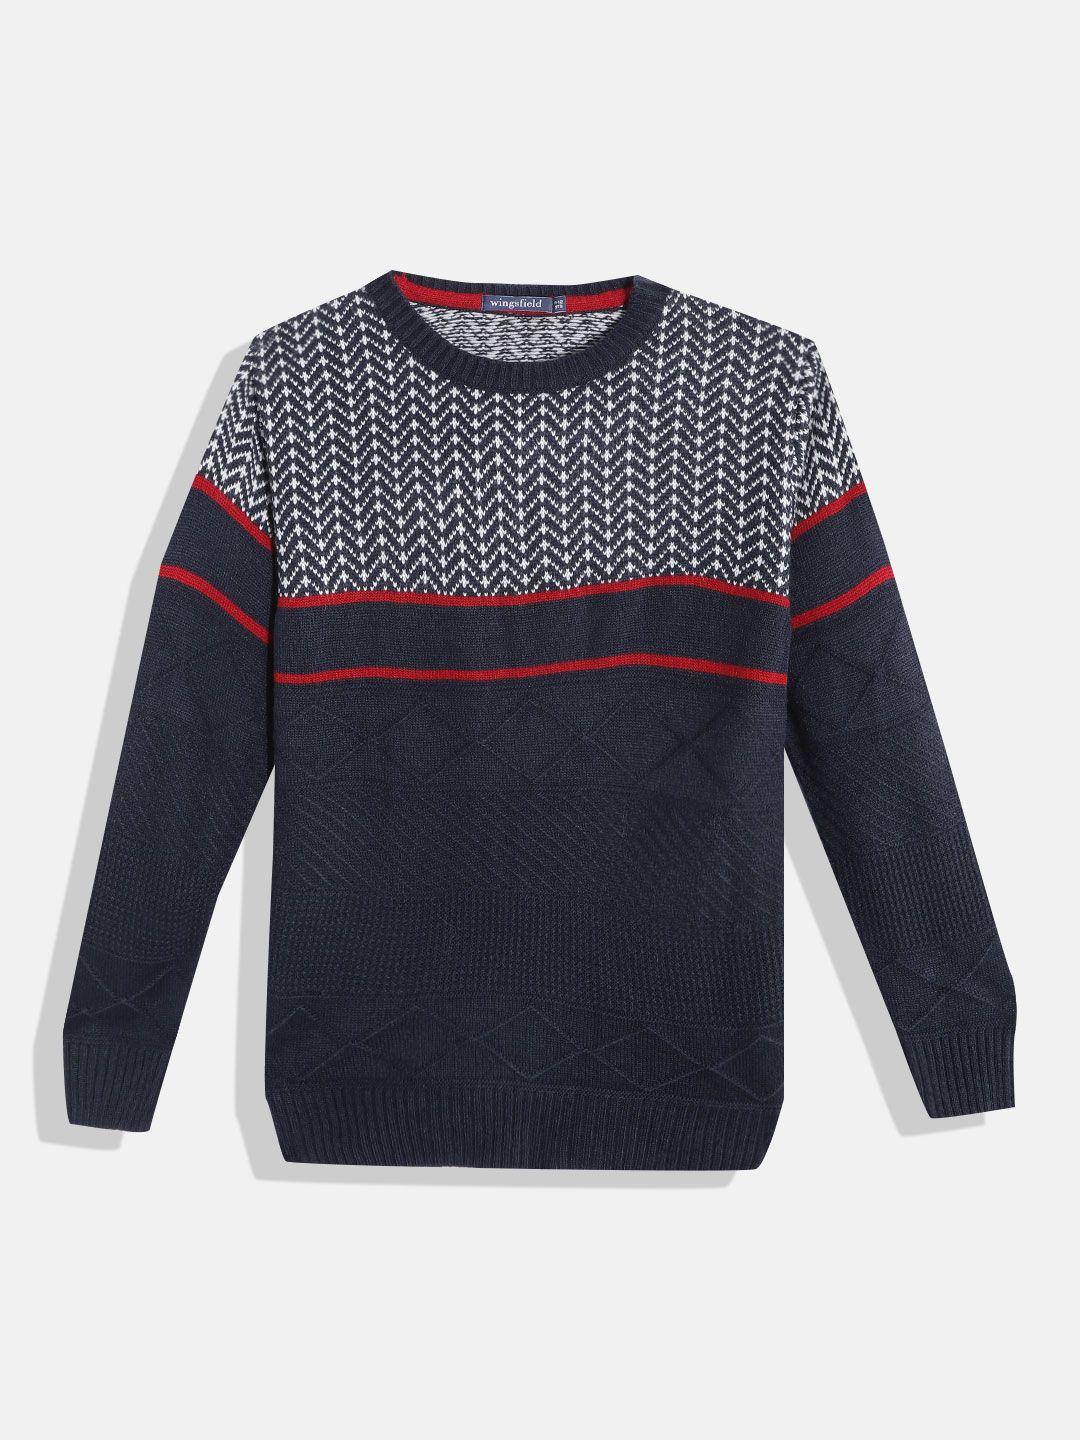 Wingsfield Boys Navy Blue & White Printed Pullover